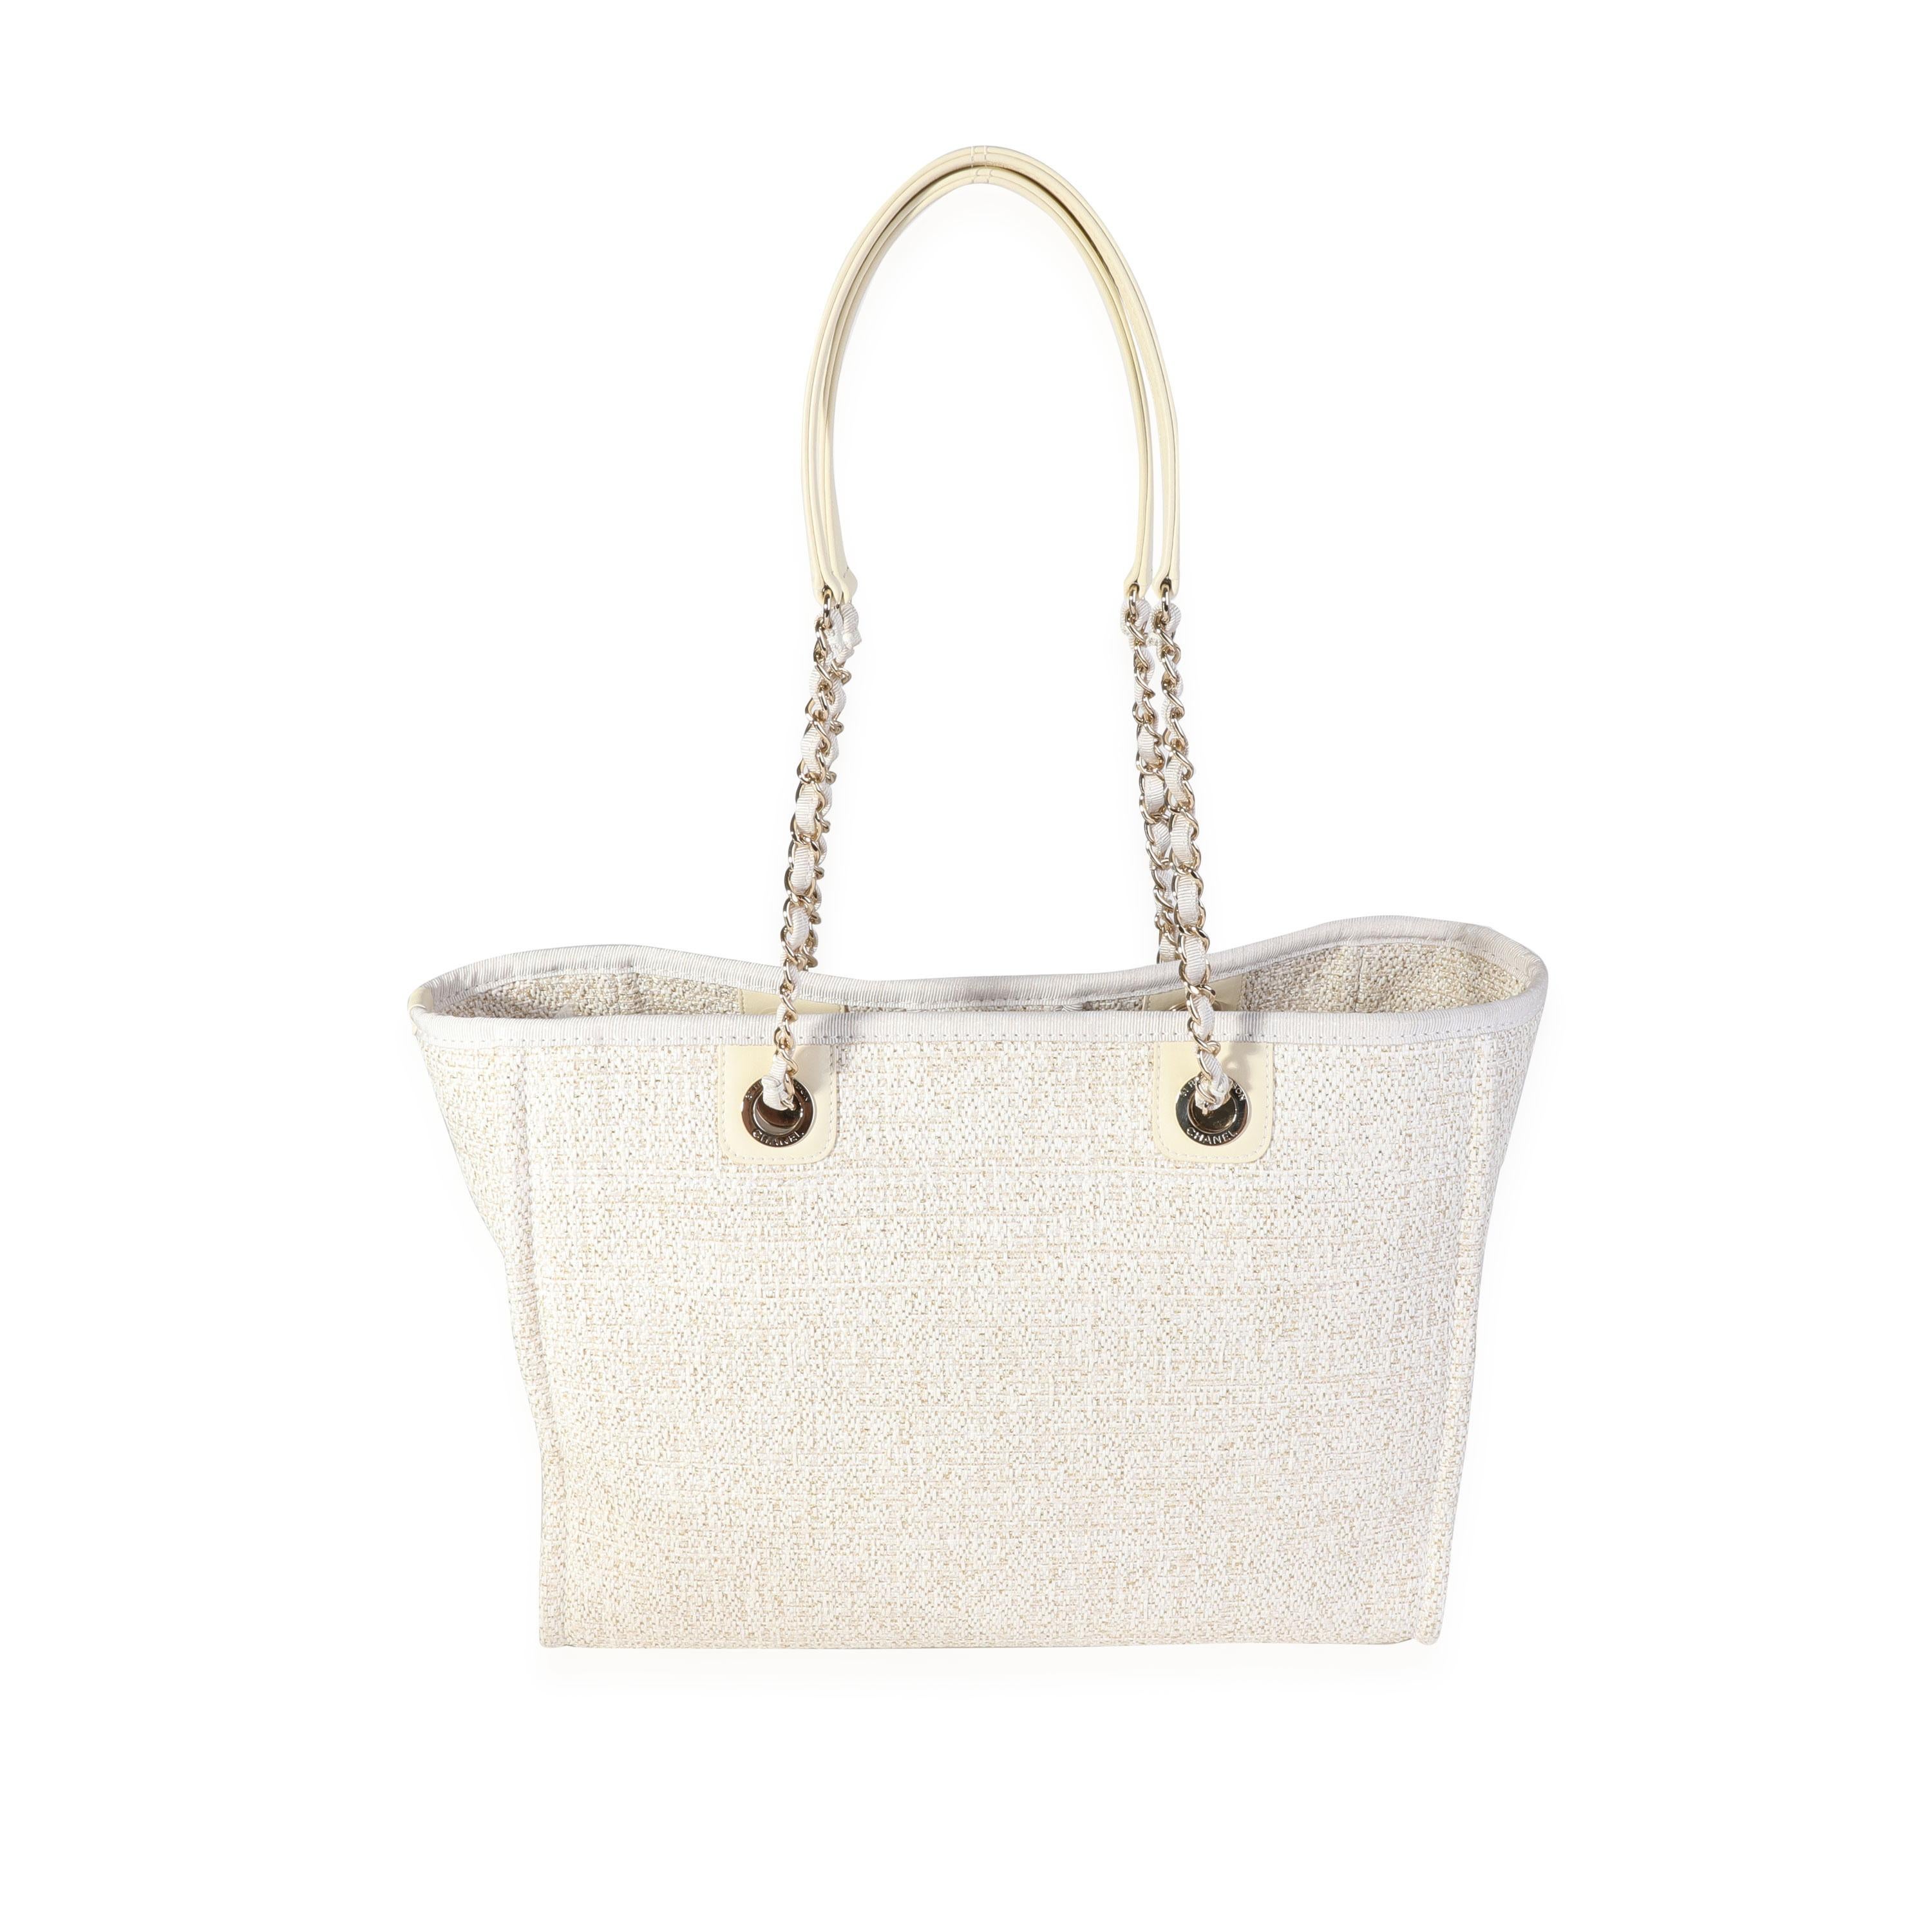 Listing Title: Chanel Ivory Metallic Tweed Small Deauville Shopping Tote
SKU: 118300
Condition: Pre-owned (3000)
Handbag Condition: Excellent
Condition Comments: Excellent Condition. Plastic on some hardware. Discoloration on exterior topline. No